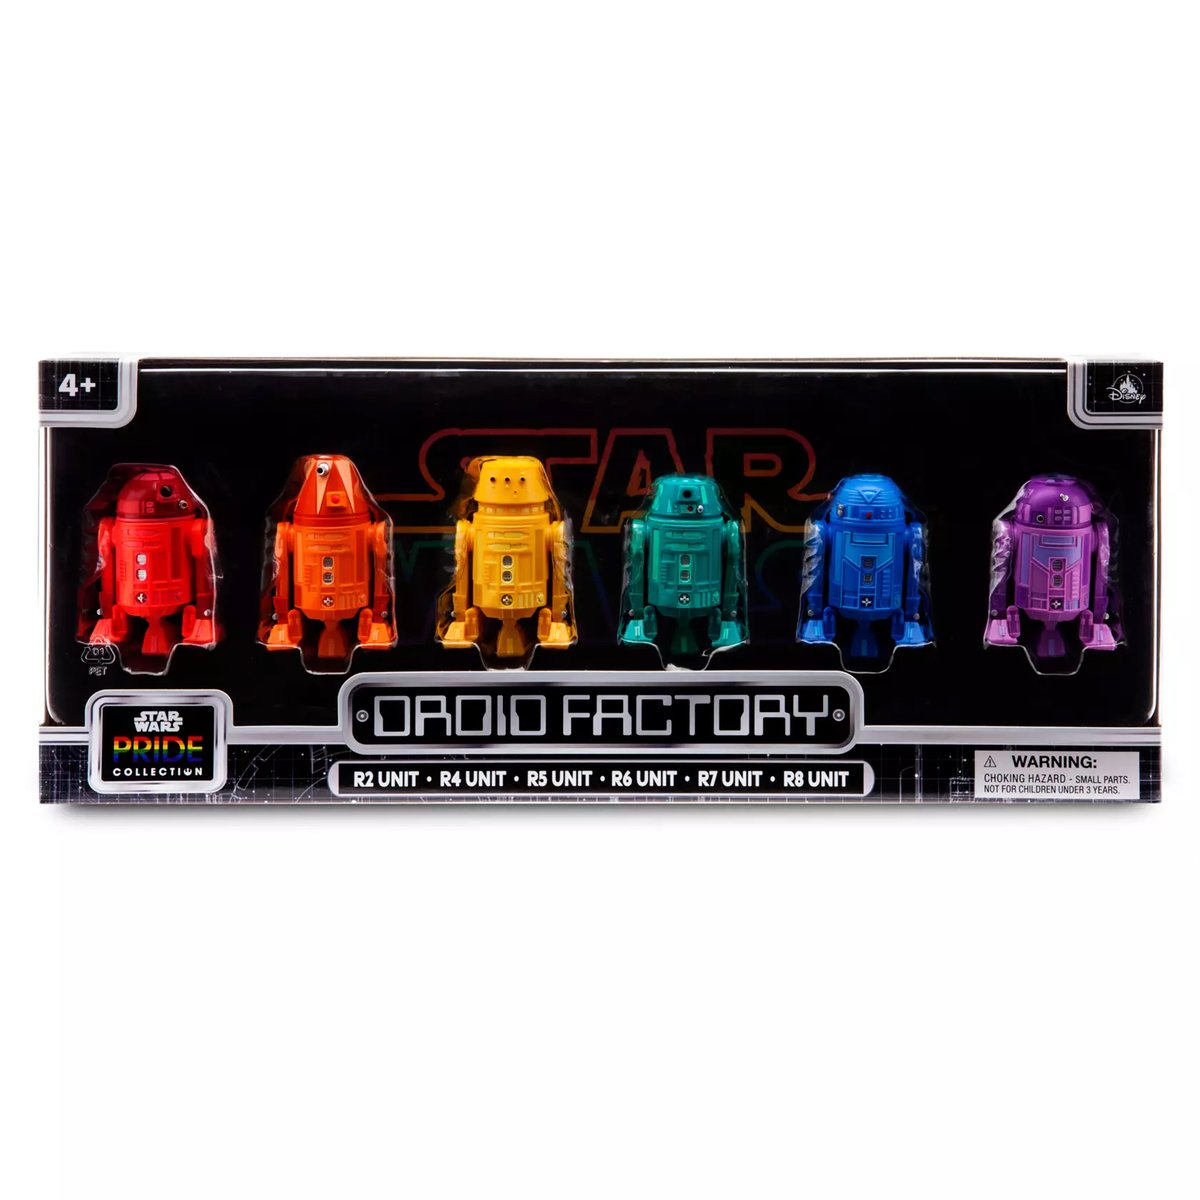 Just in case anyone might have thought that the rainbow alphabet woketards haven't infiltrated EVERYTHING yet...

#starwars #droidfactory #disney #disneystarwars #starwarsisgay #pride #starwarspridecollection #queeractionfigures #droidsaregay #bby0u #homoastromechs #thisissogay